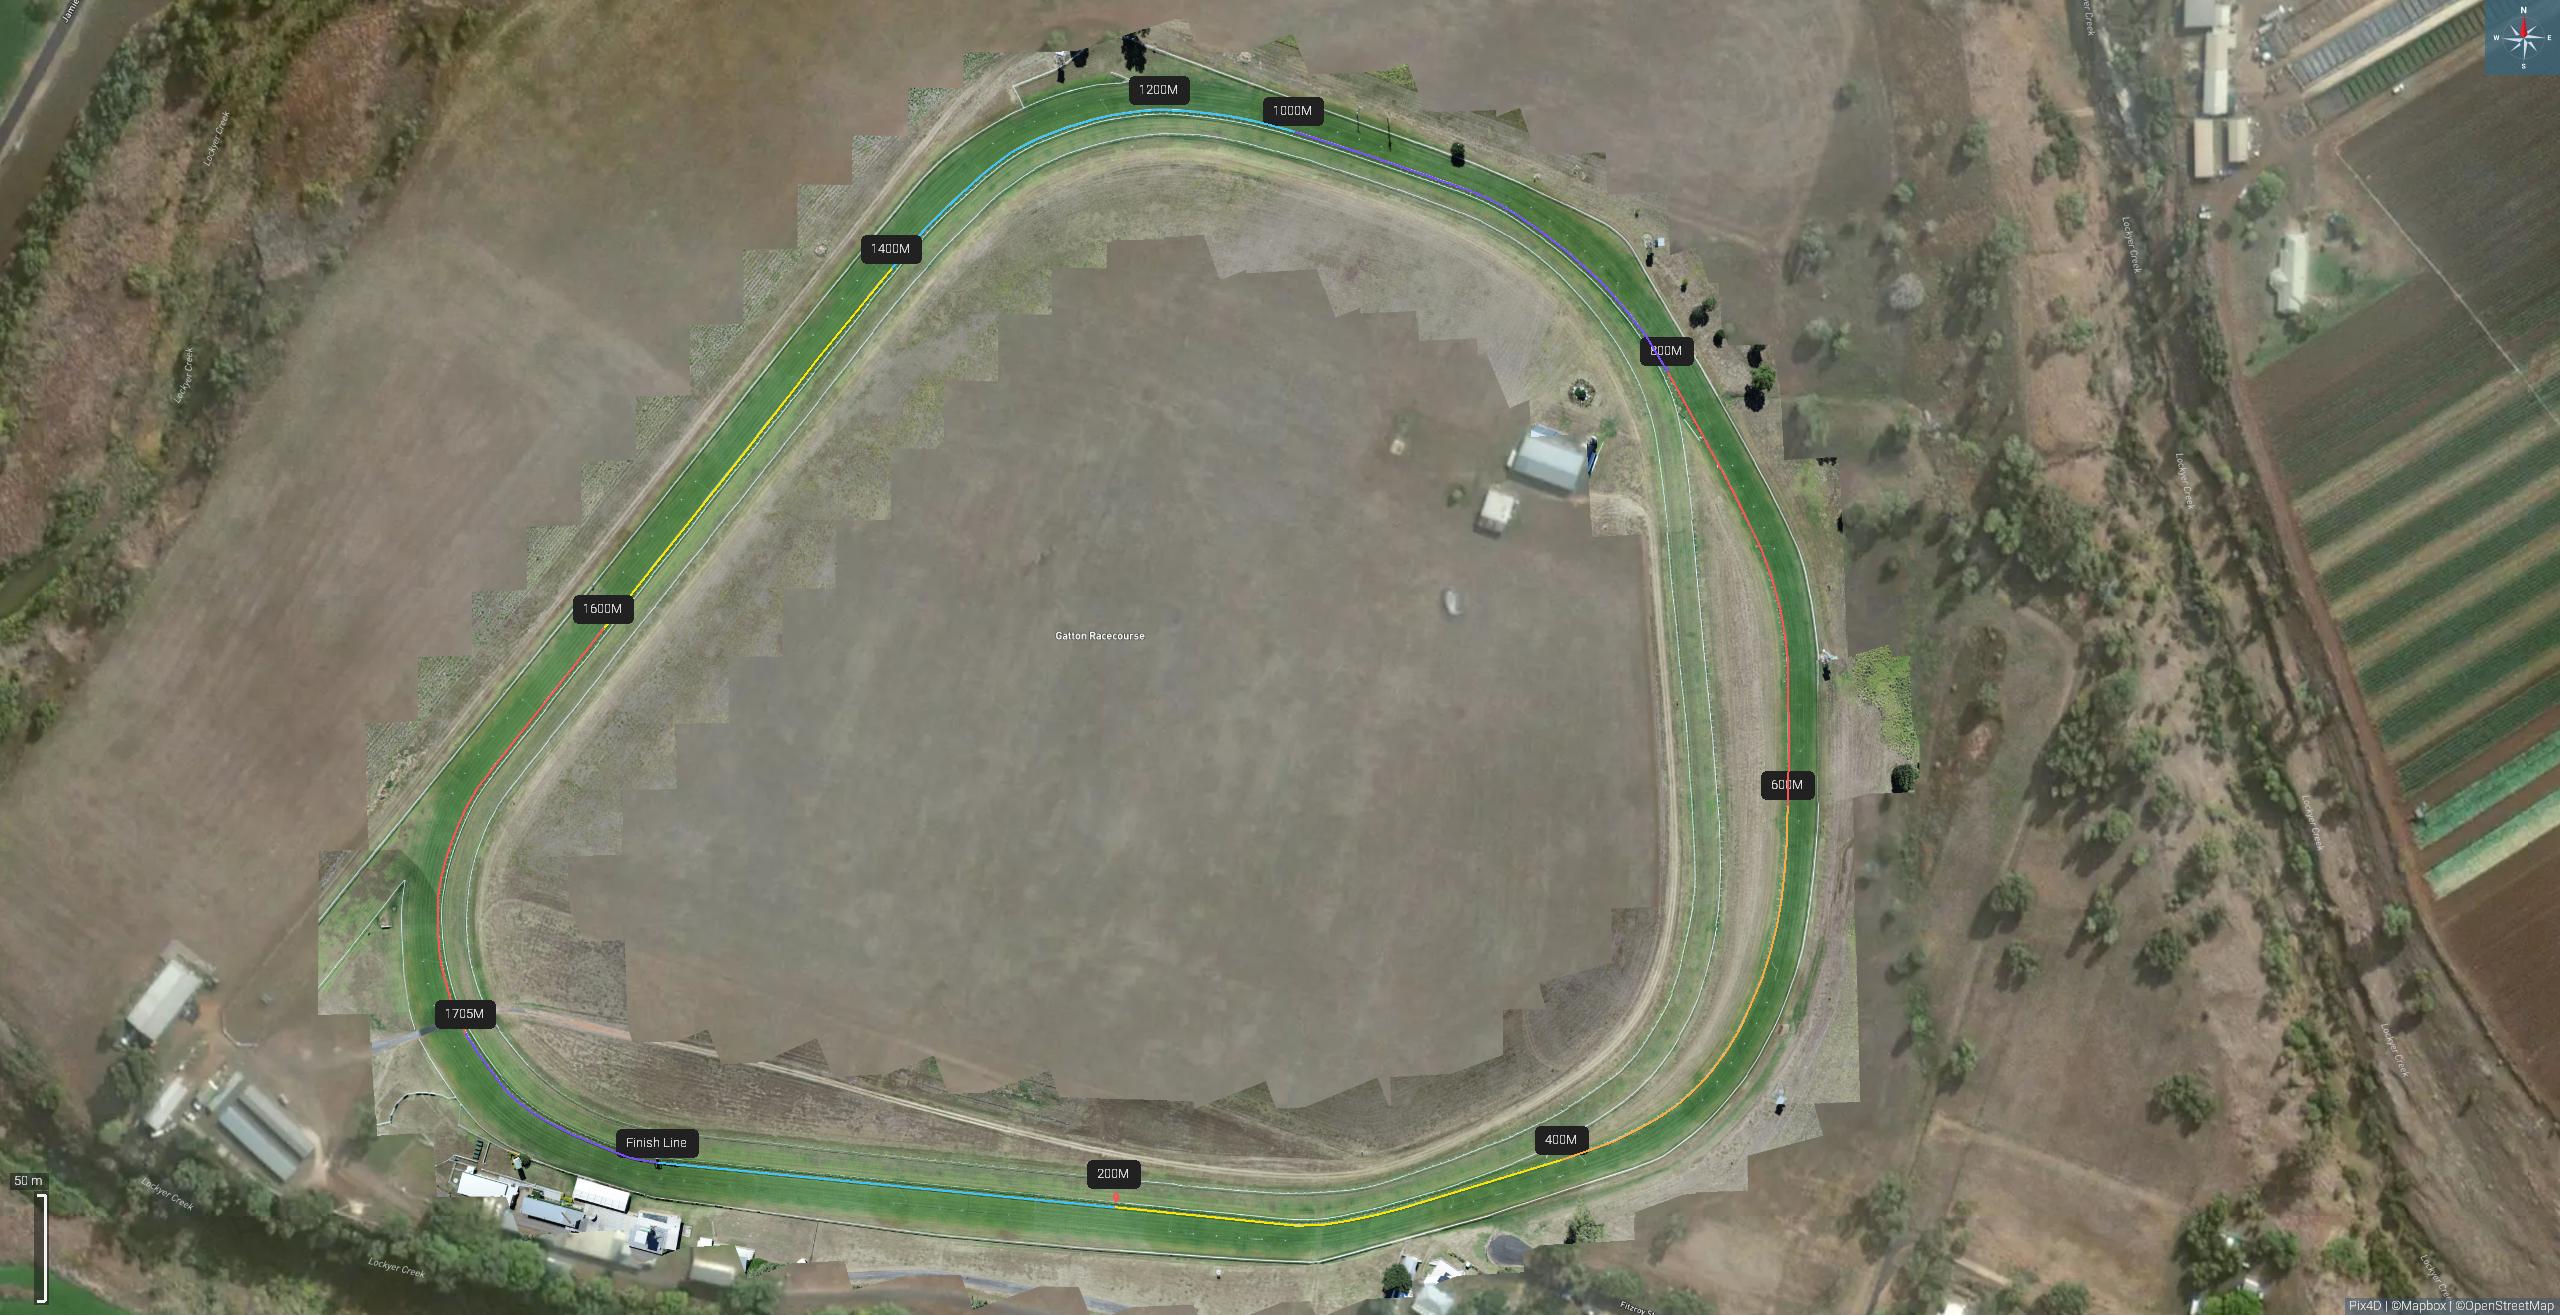 Lockyer Valley Turf Club Race Course Track Map